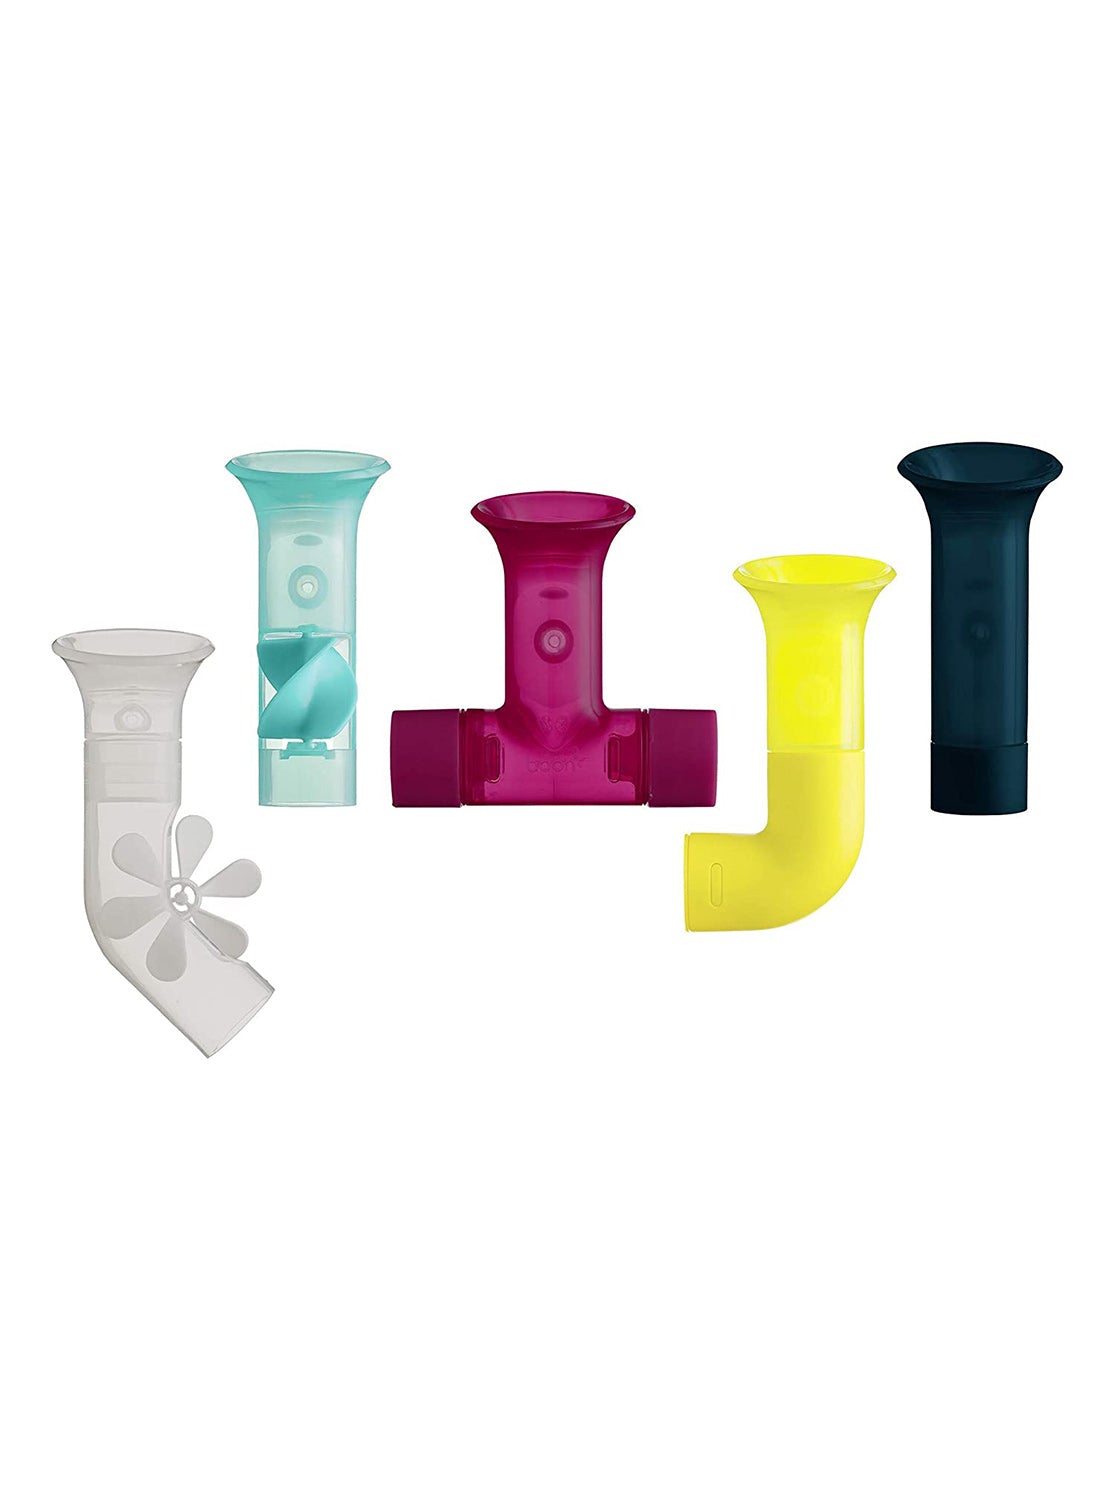 Boon Set of 5 Building Bath Pipes Toy - ANB Baby -bath toy